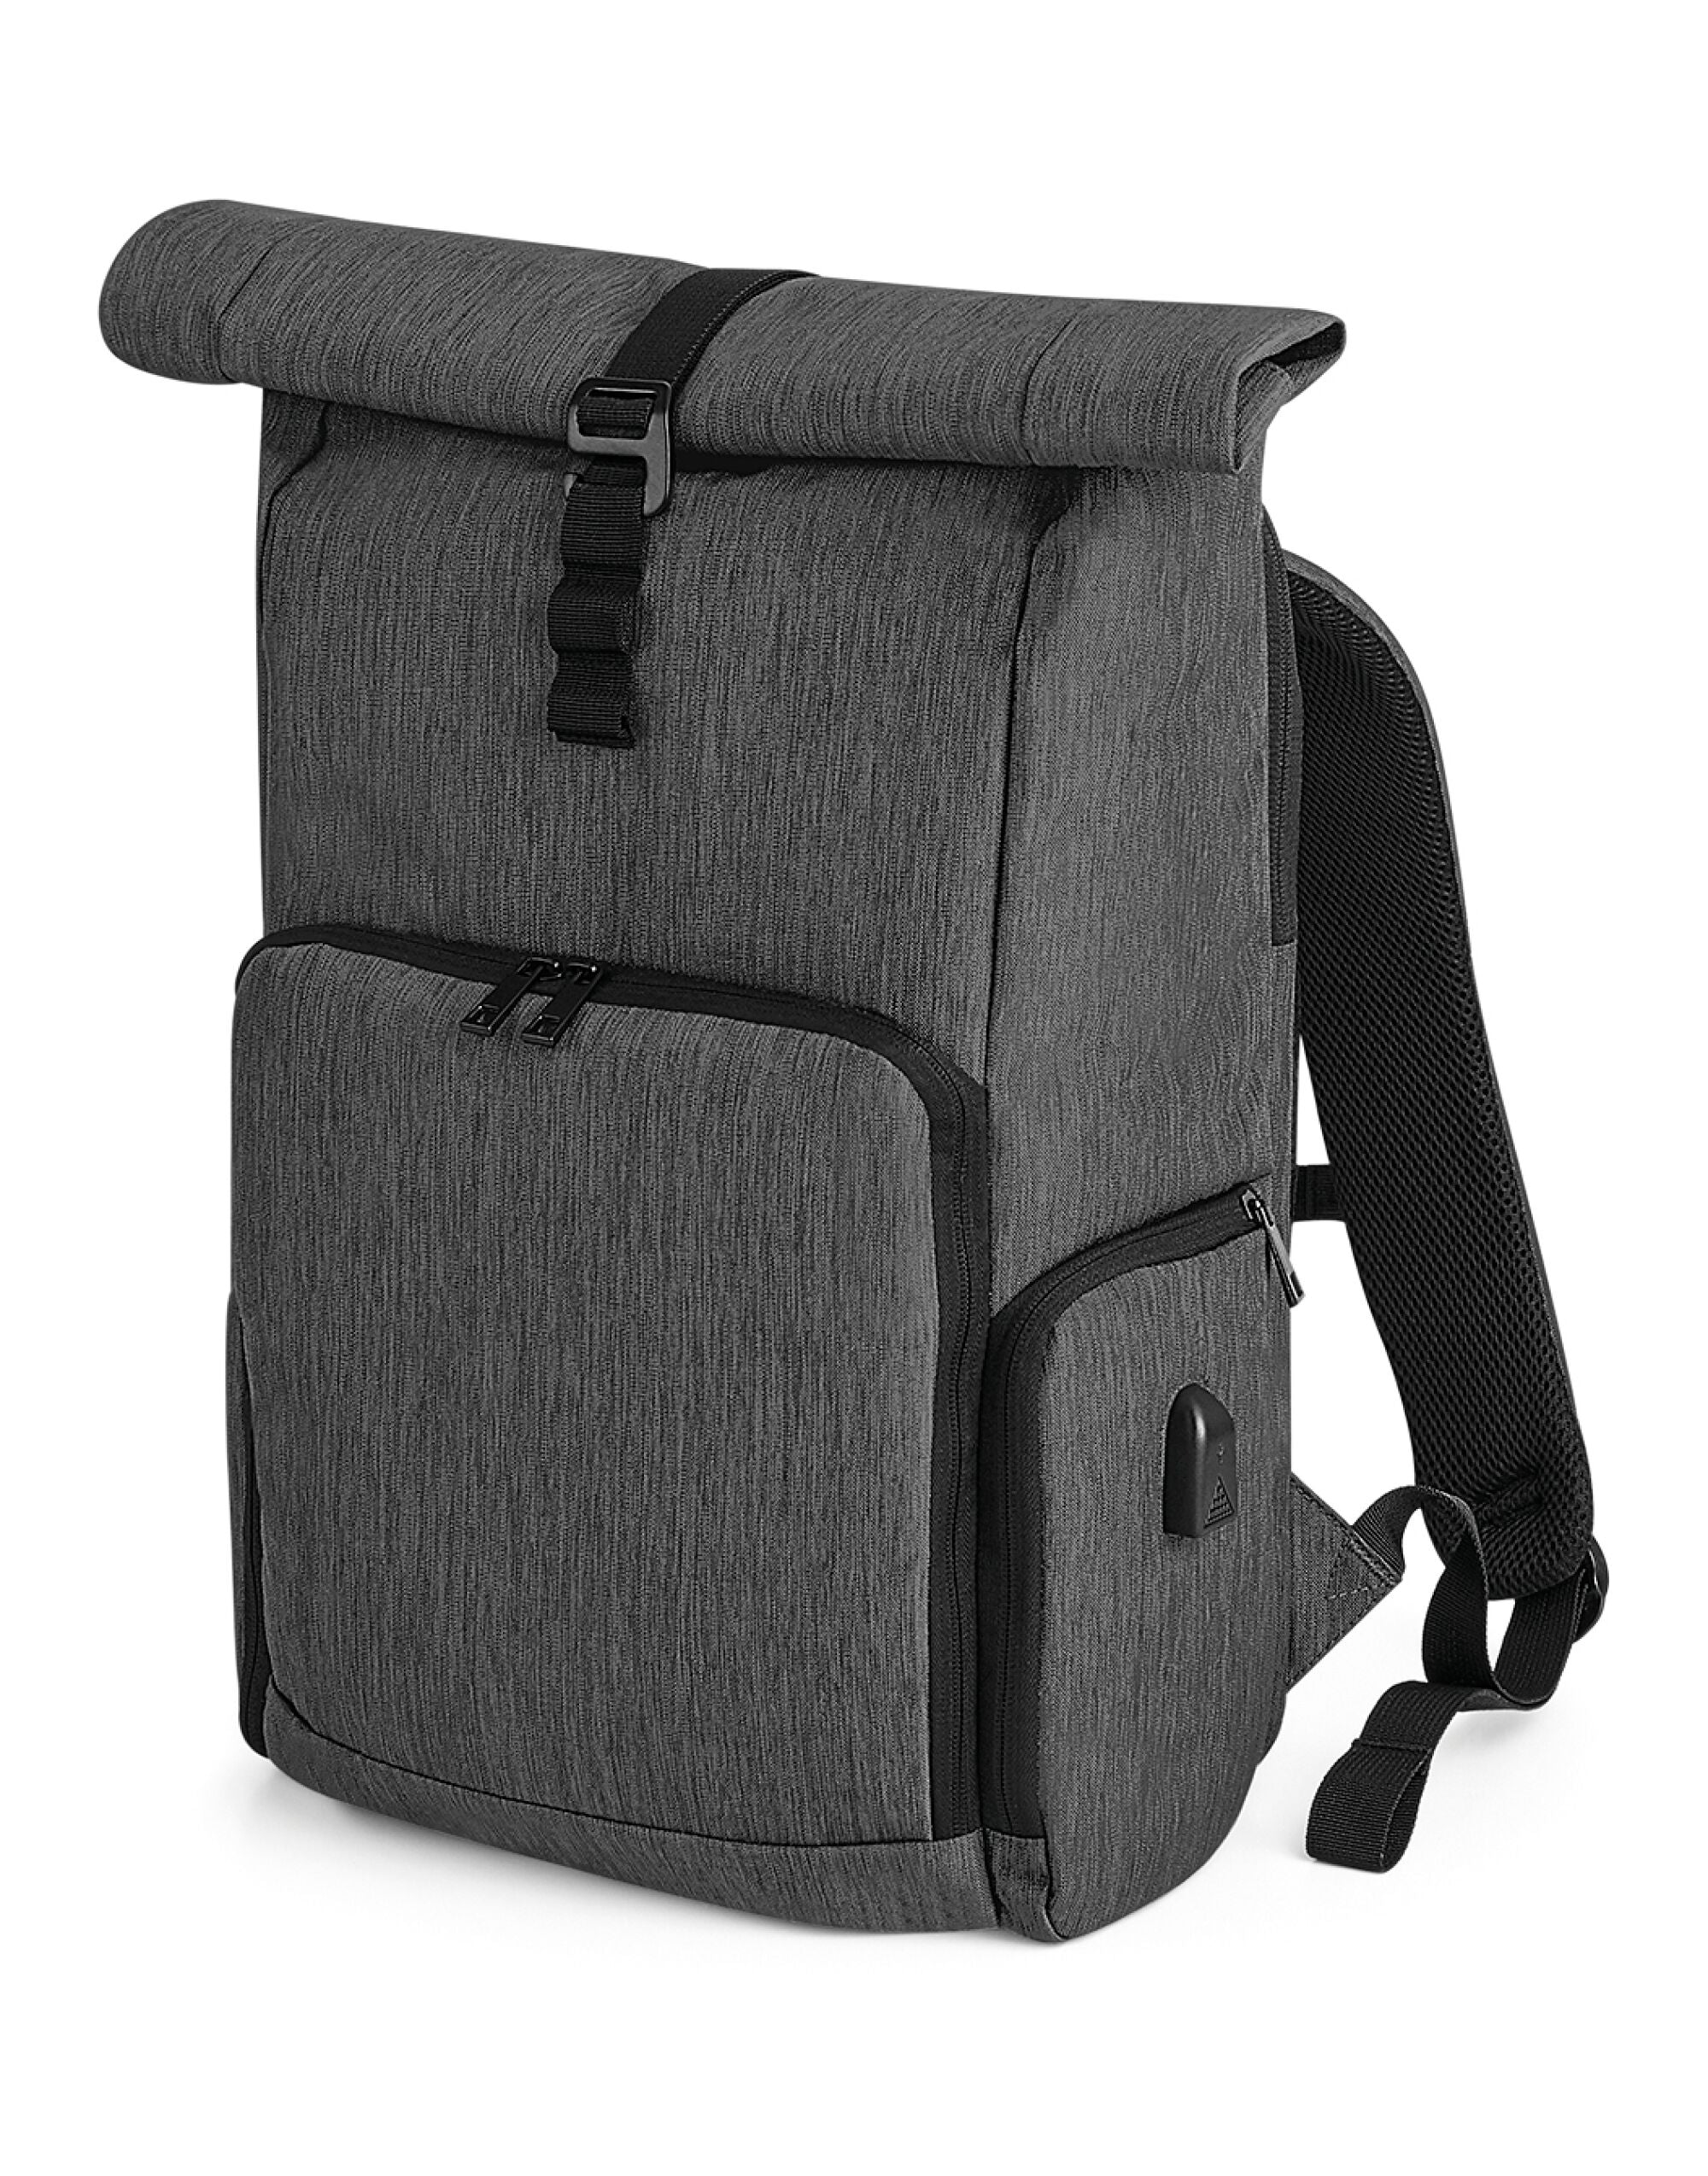 Quadra Q-Tech Charge Roll-Up Backpack TearAway label for ease of rebranding (QD995)